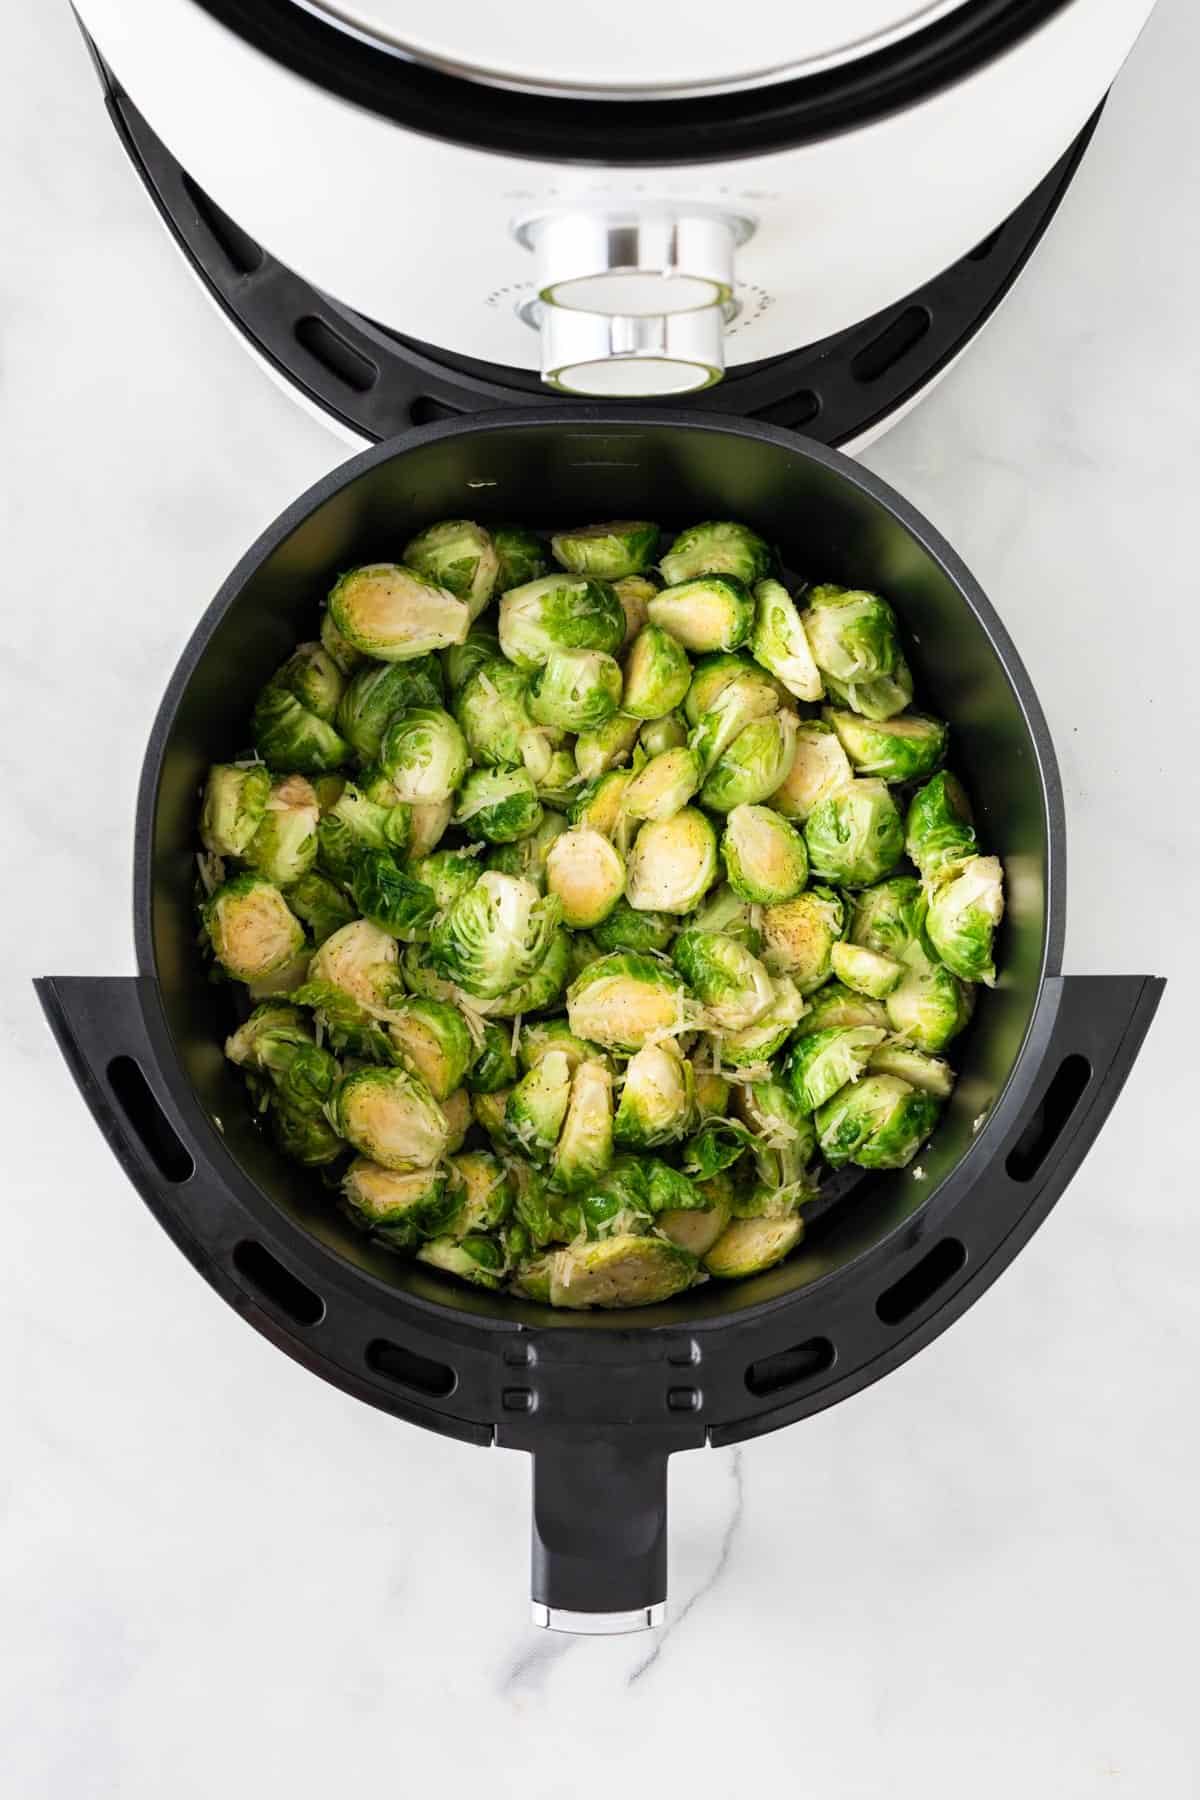 placing the brussels into the air fryer basket